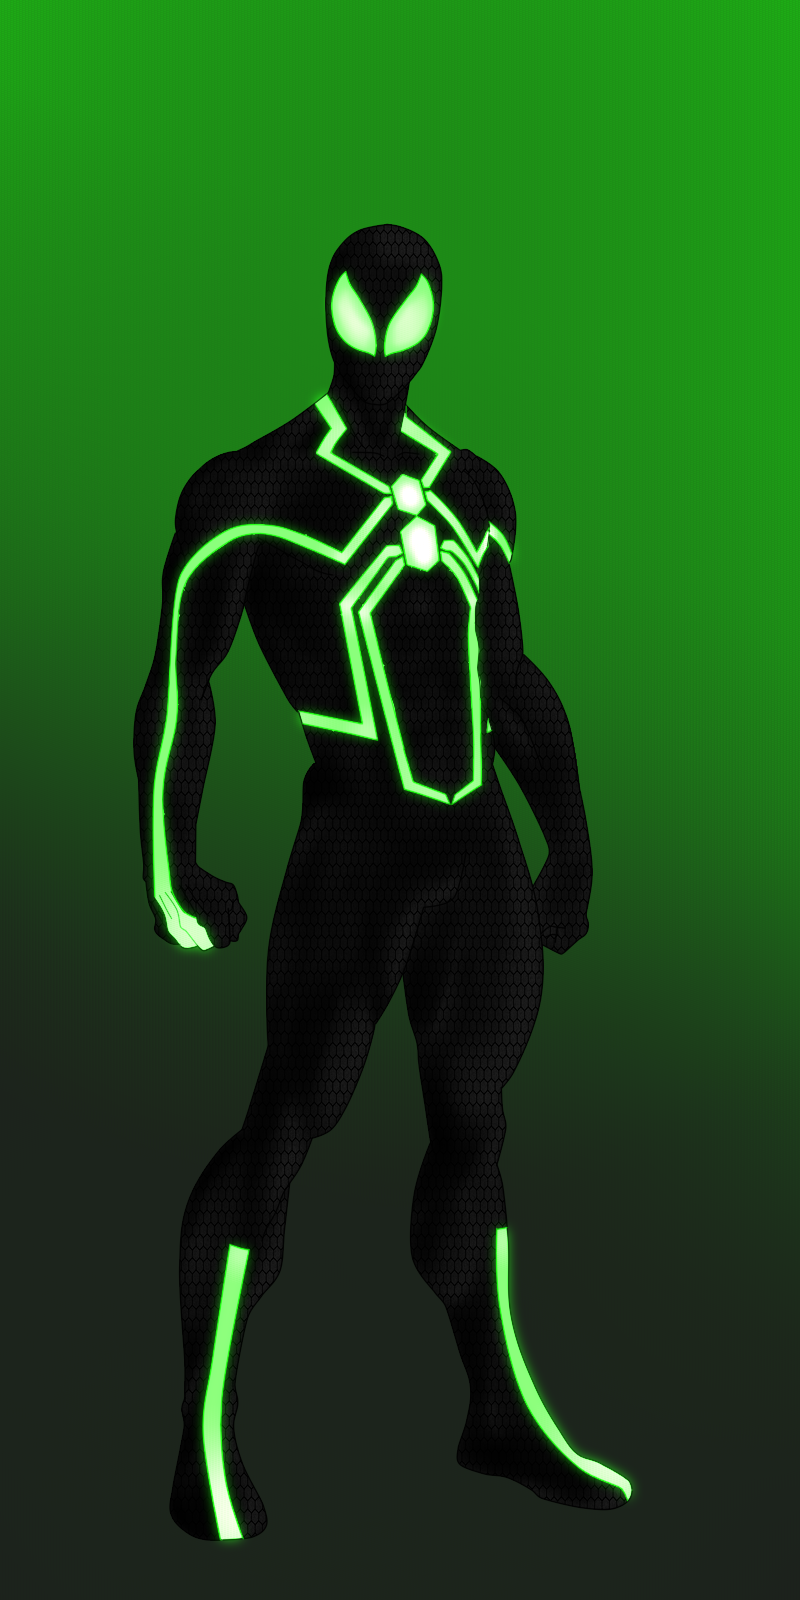 Green and brown spidersona in the style of marvels spiderman